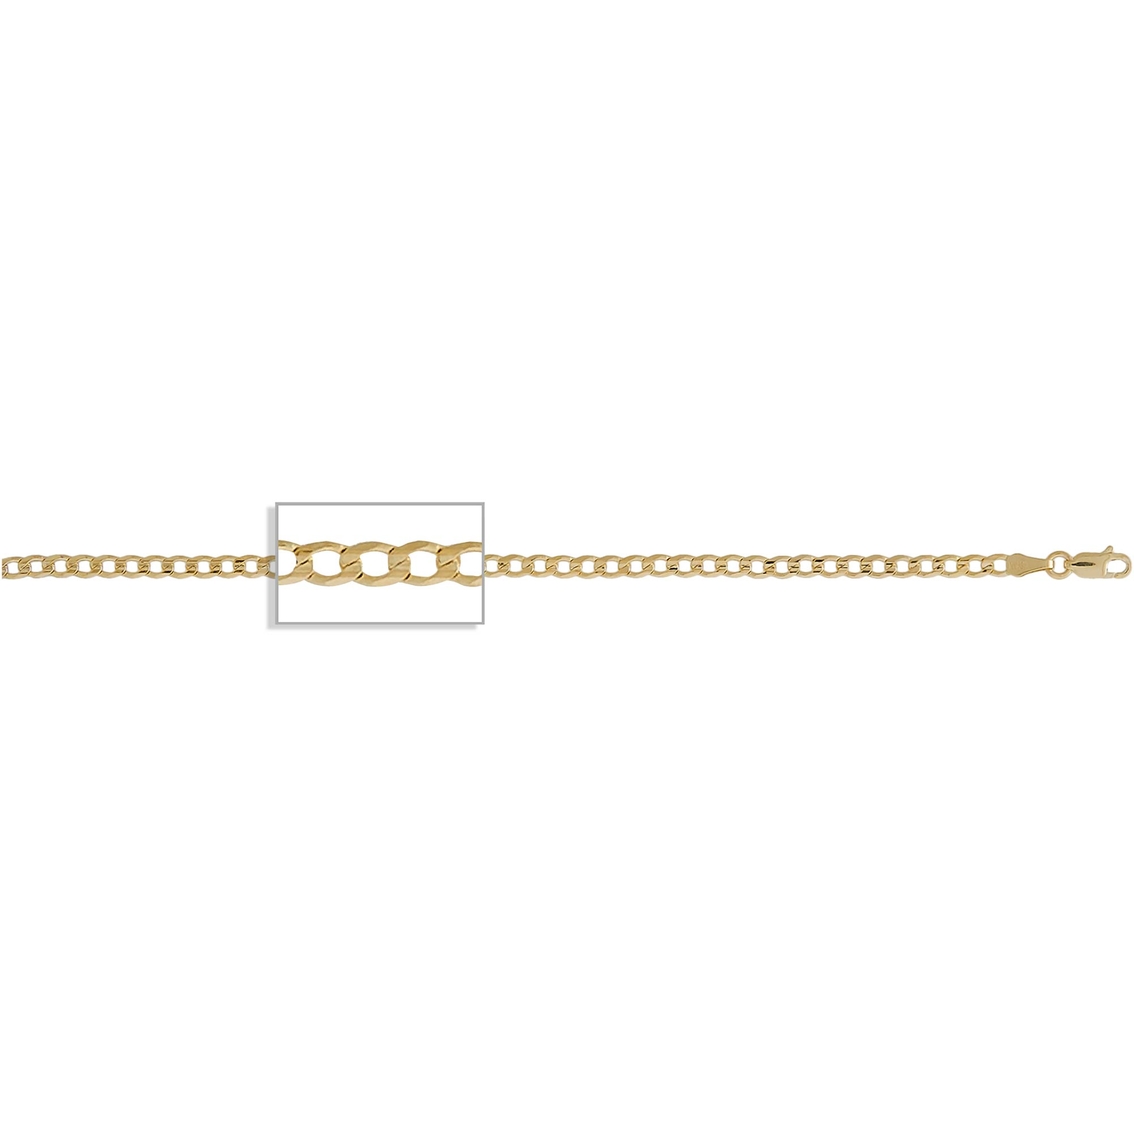 10K Yellow Gold 3.7mm Curb Bracelet - Image 2 of 3